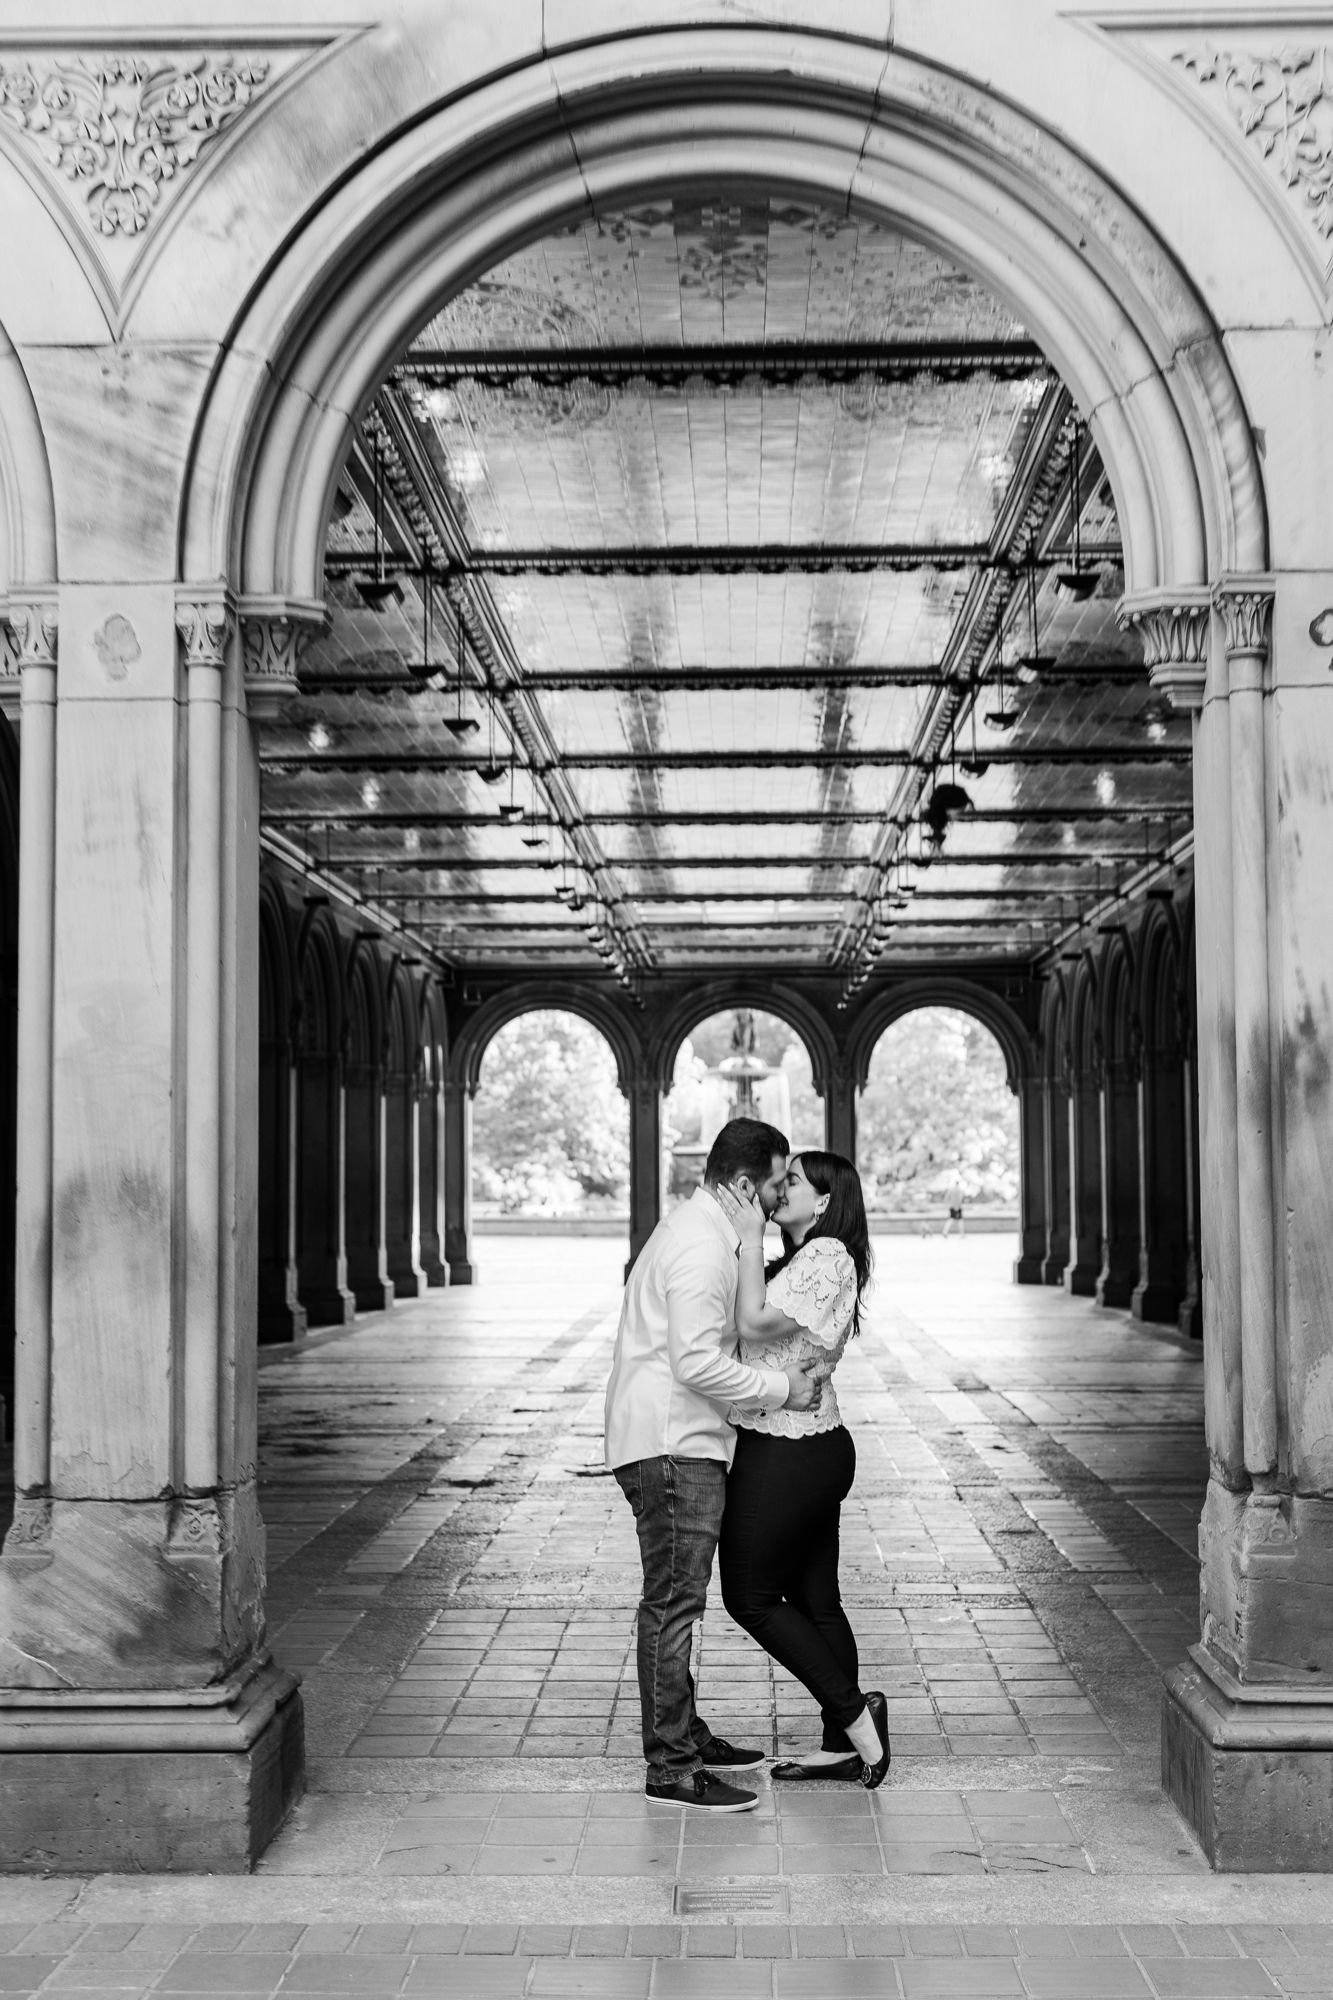 Joyous Central Park Engagement Photos in New York